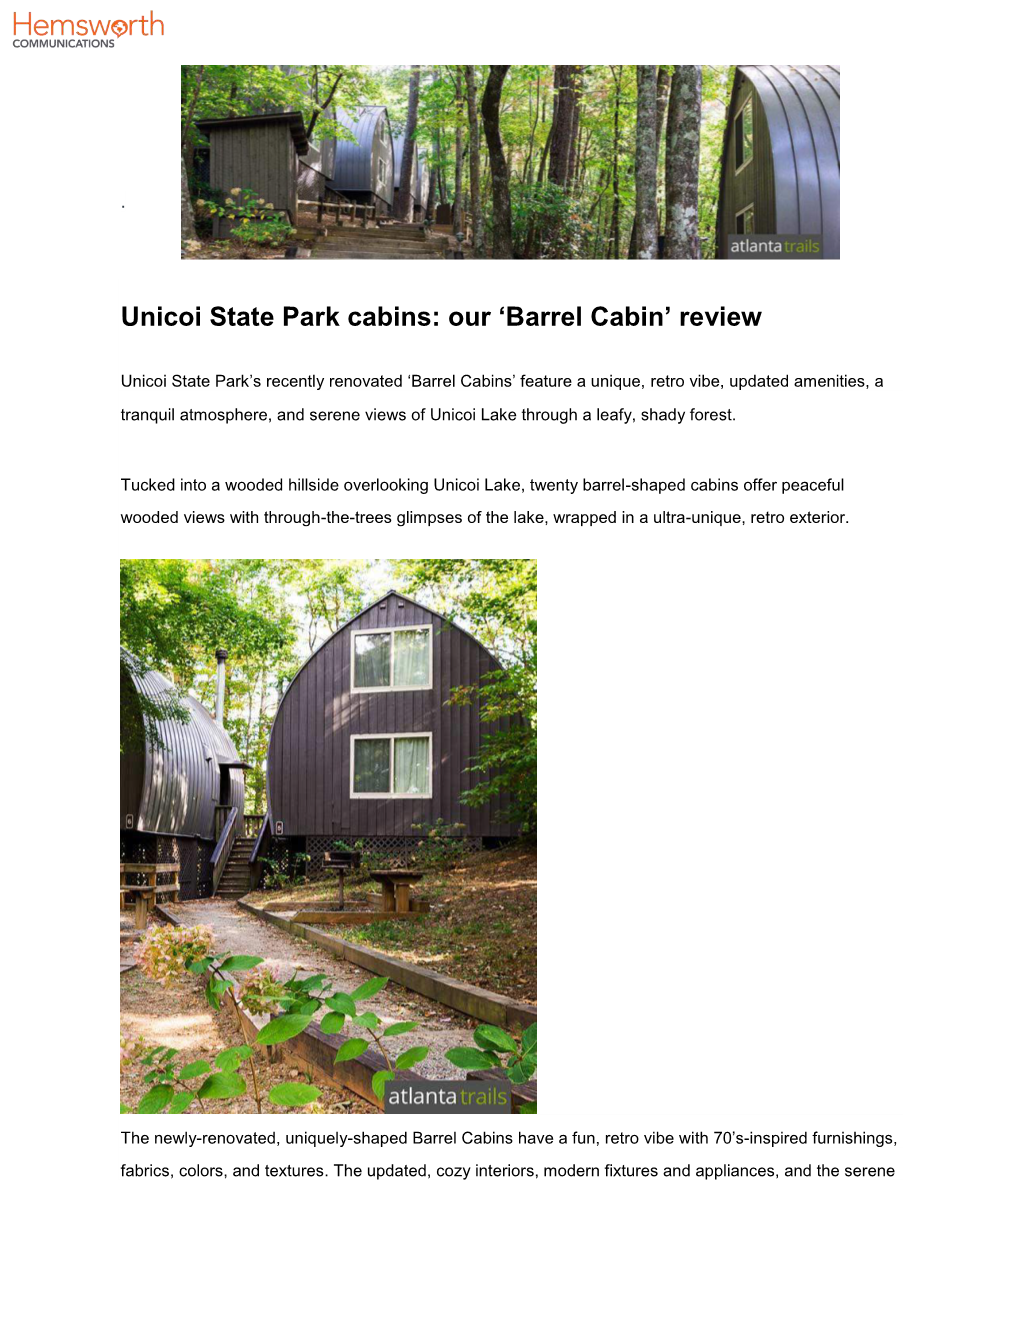 Unicoi State Park Cabins: Our ‘Barrel Cabin’ Review